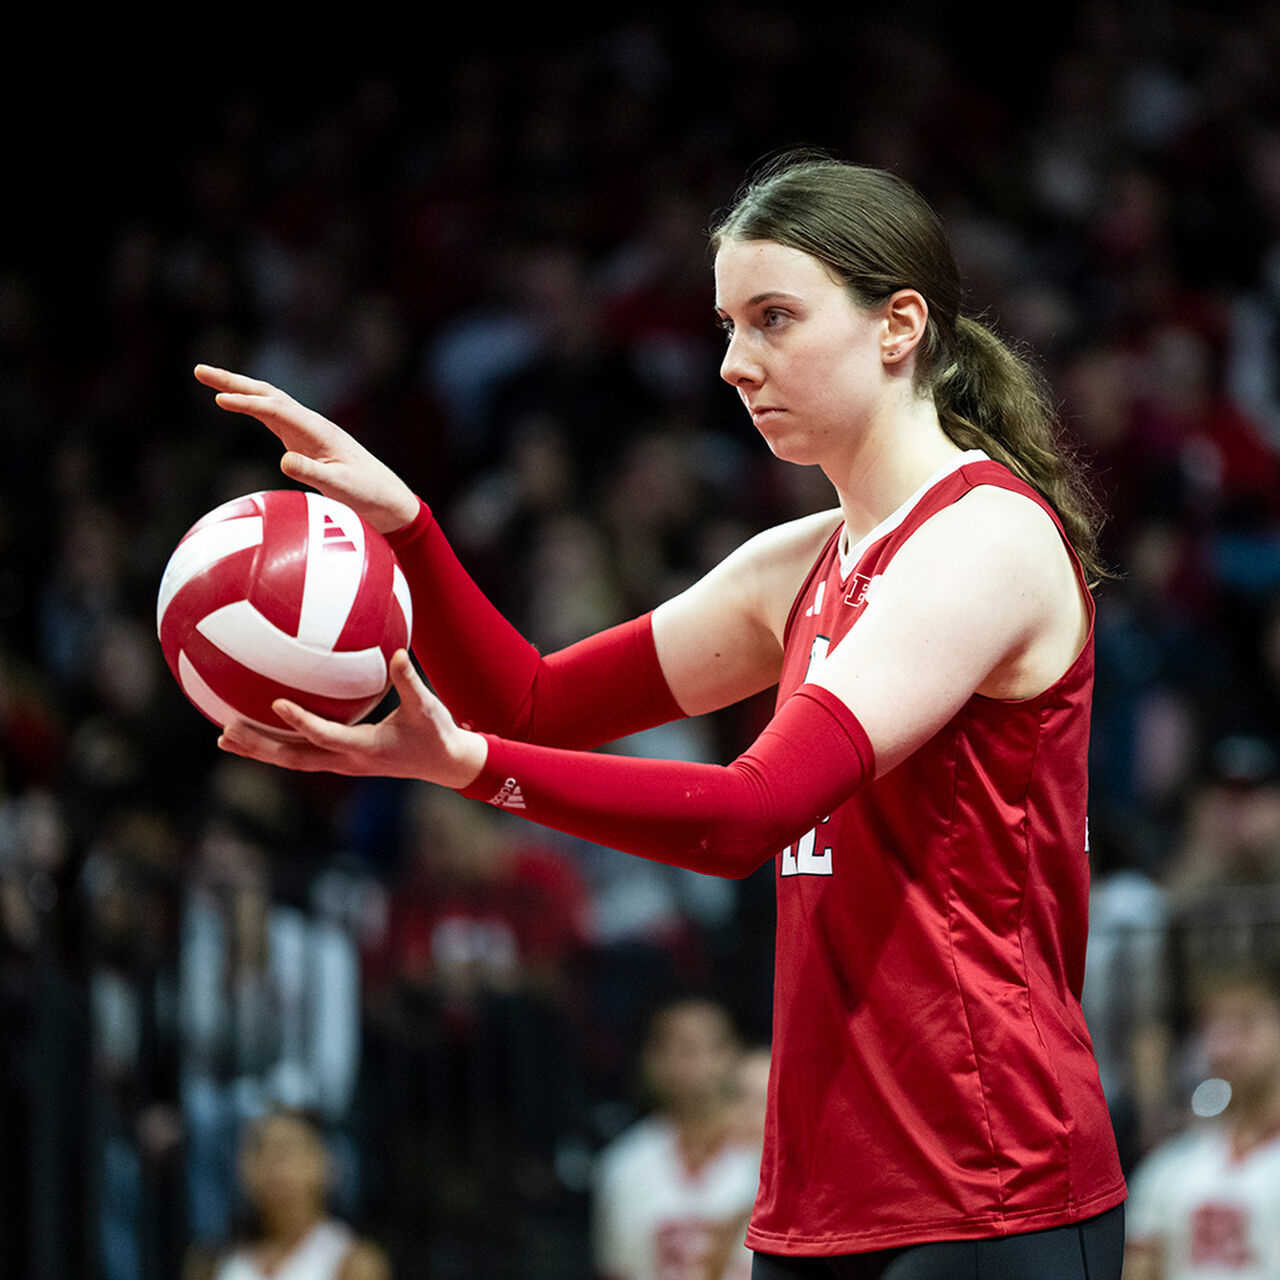 Rutgers Women's Volleyball player image number 0